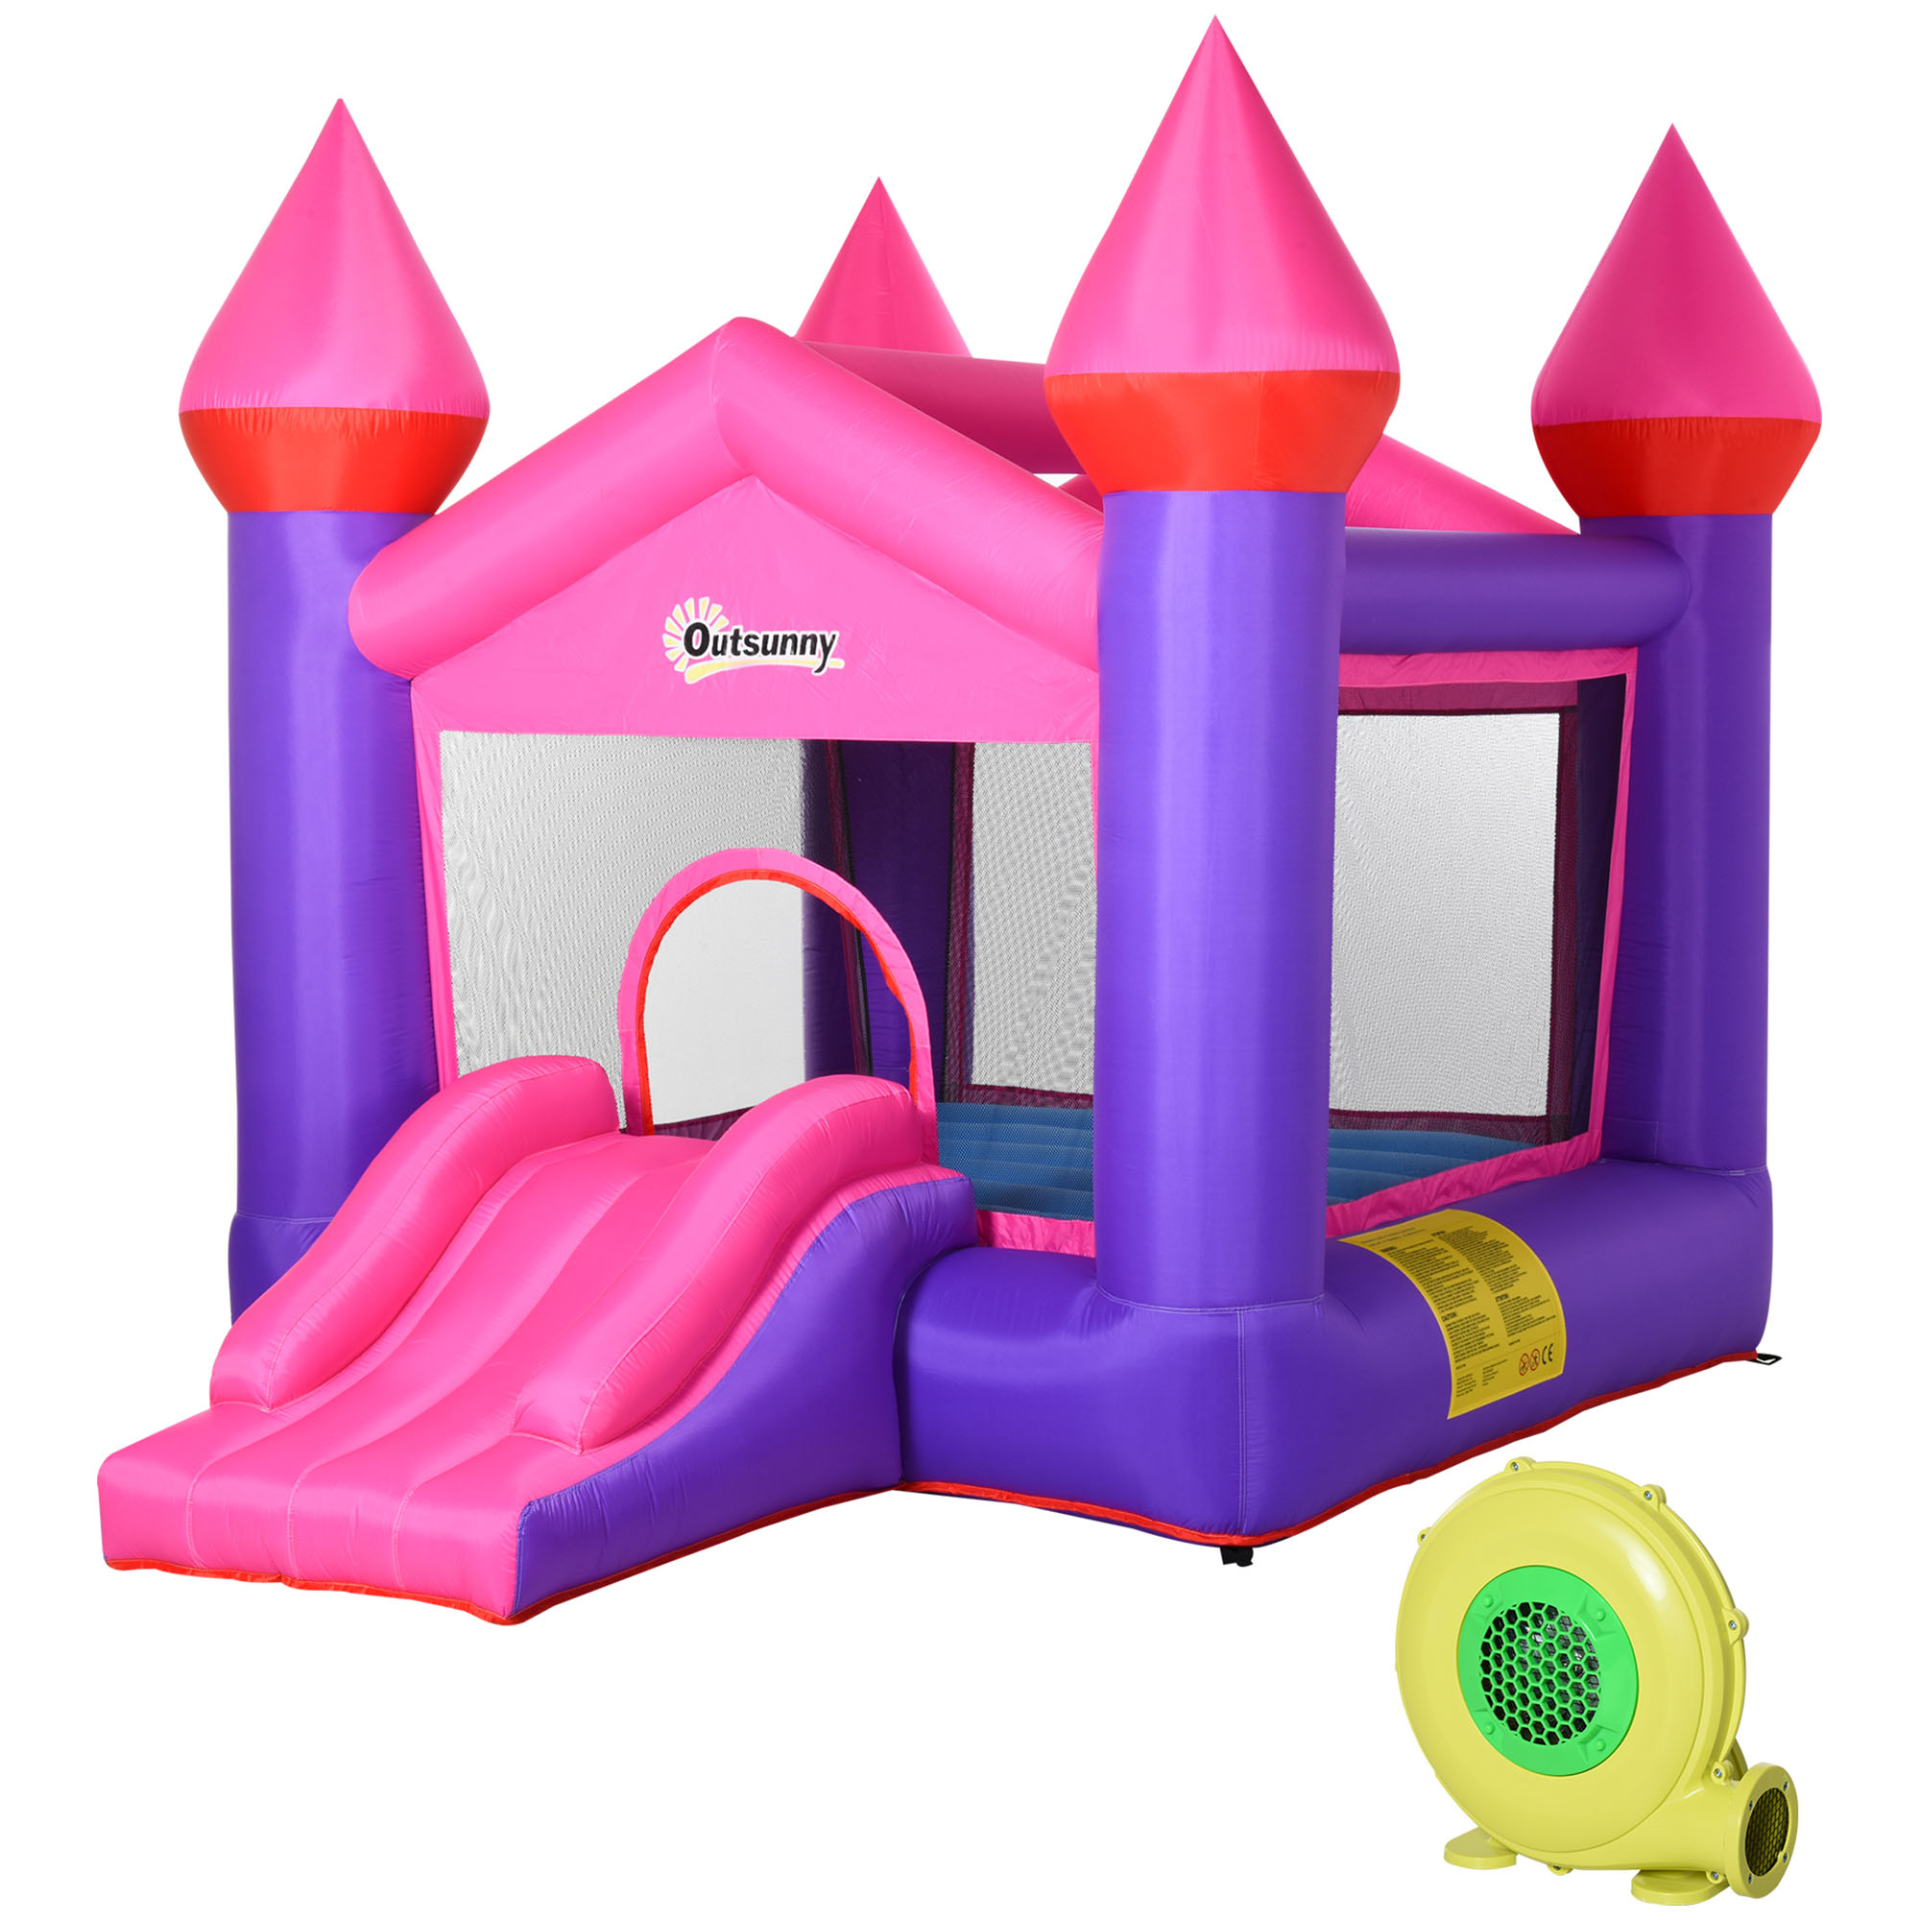 Outsunny Kids Bounce Castle House Inflatable Trampoline Slide 2 in 1 with Blower